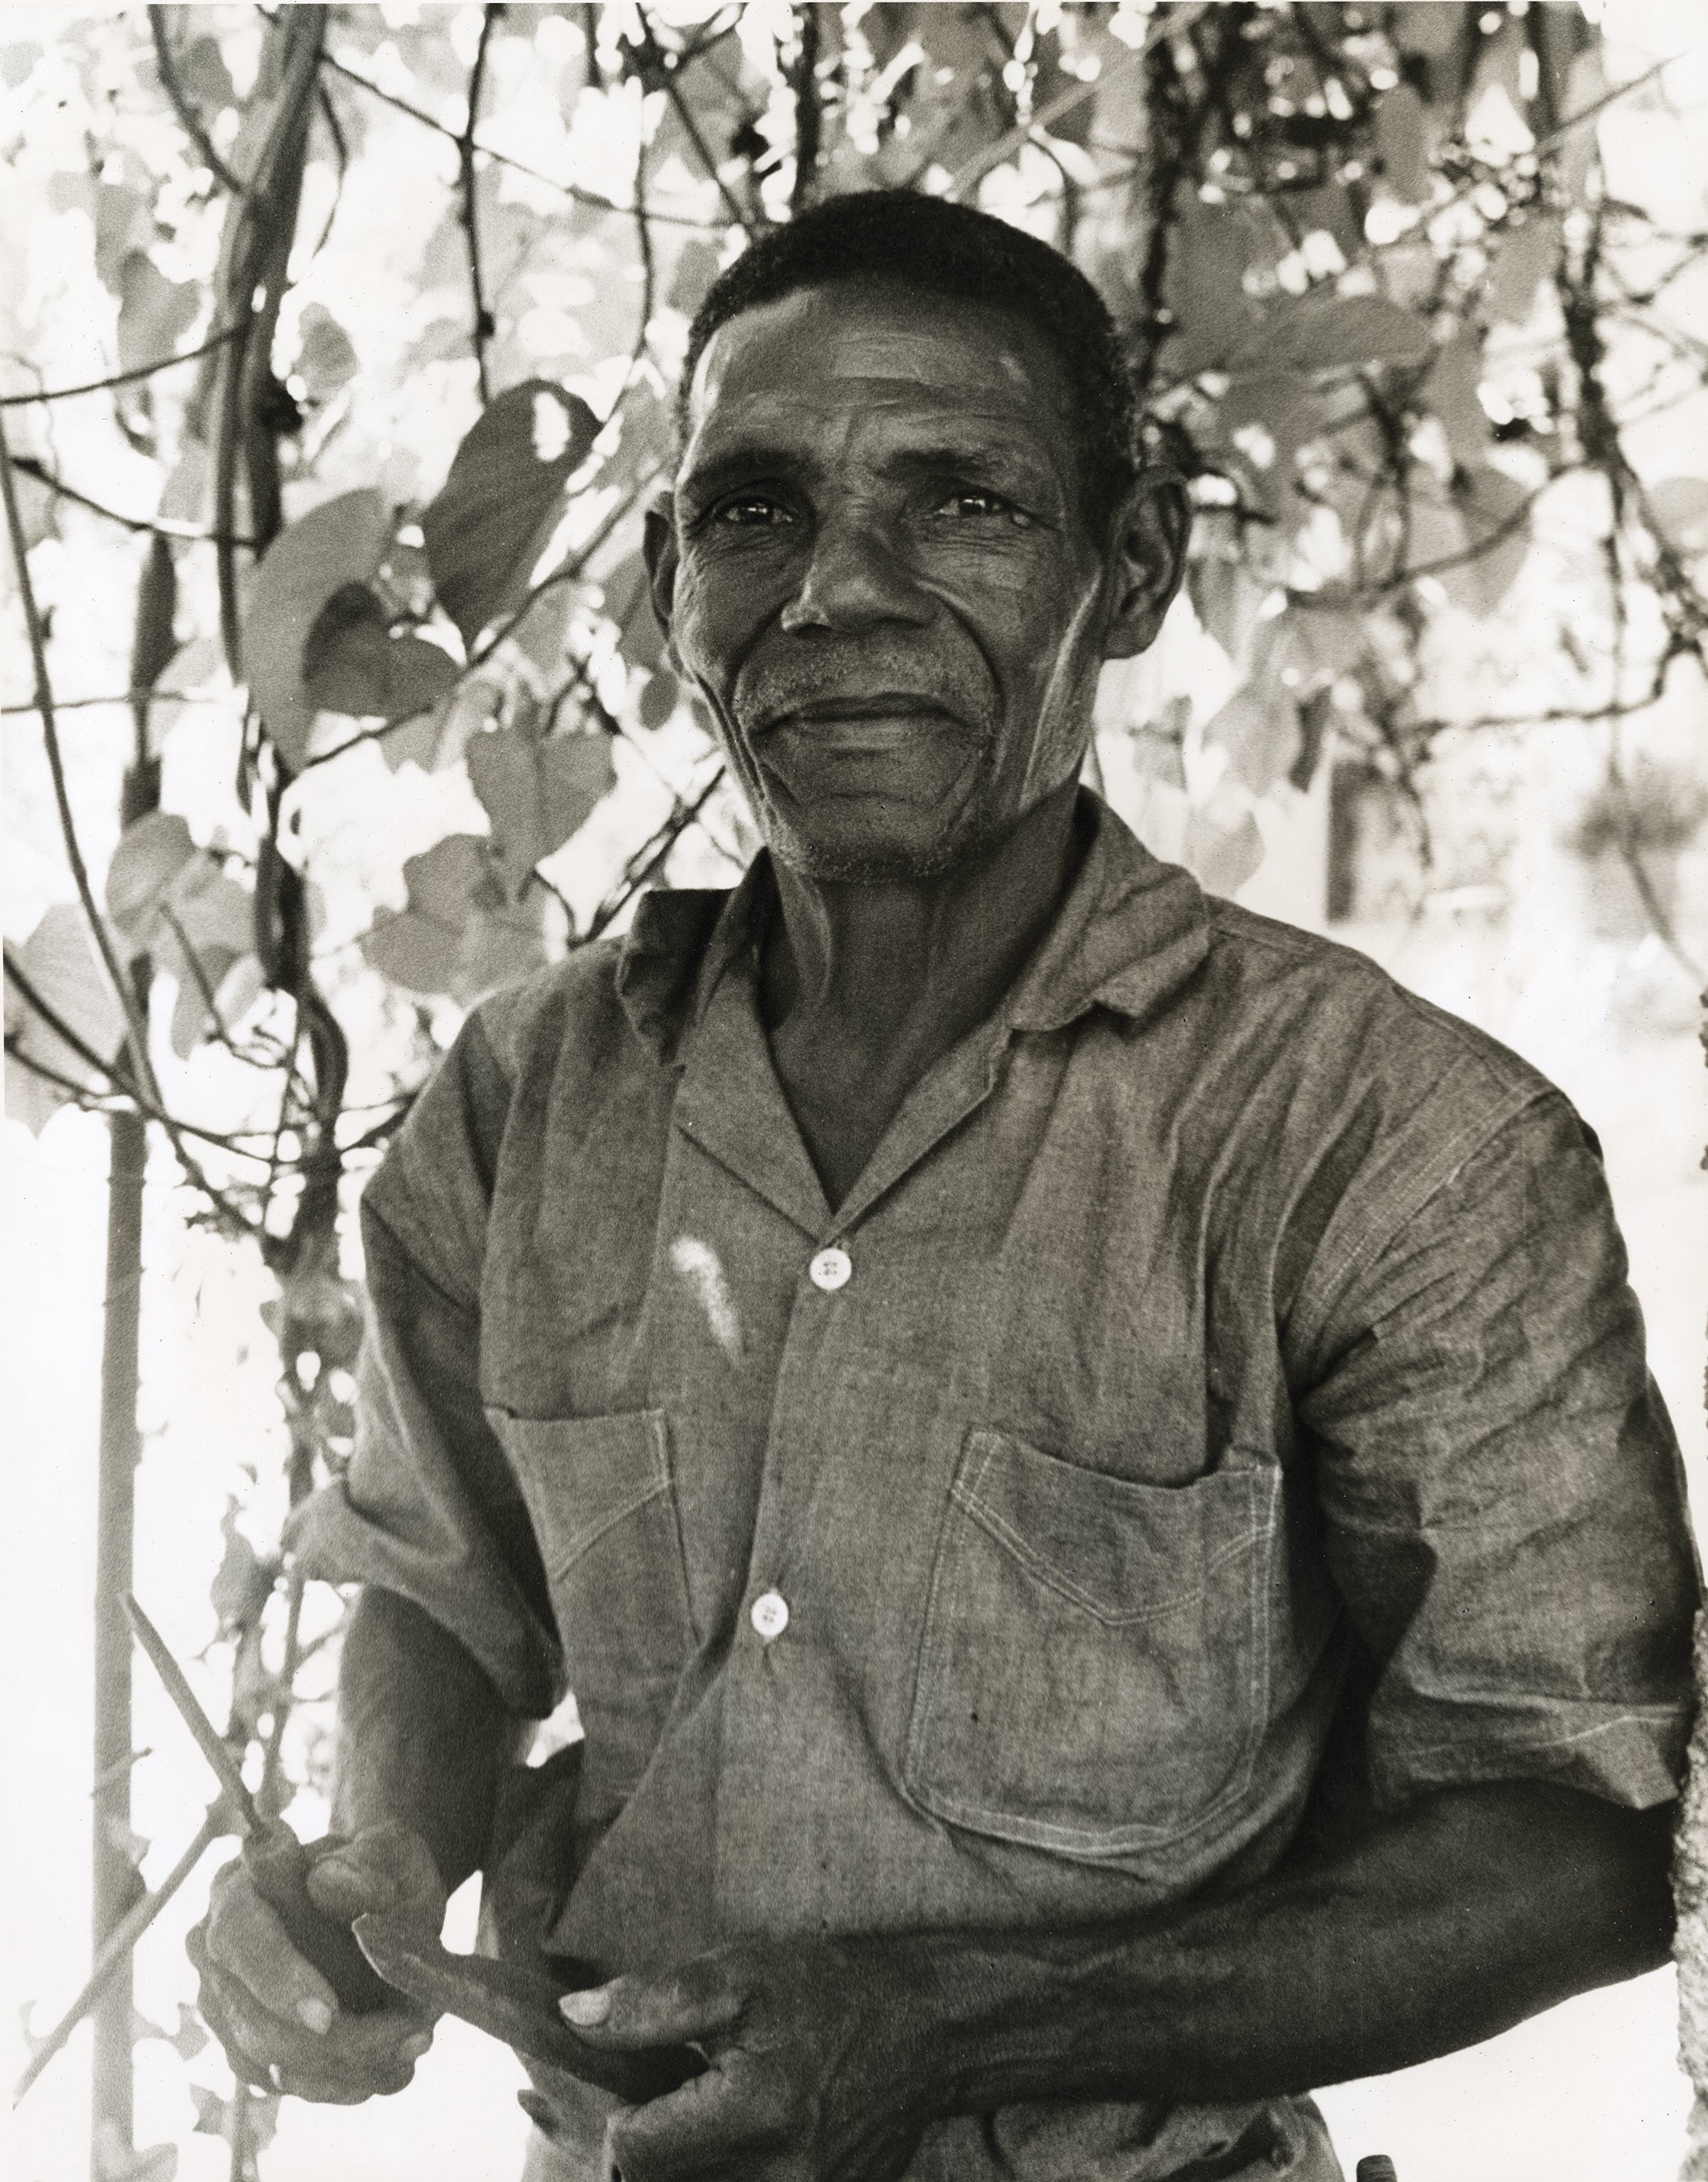 Georges Liautaud with his tools c. 1960s Photograph by William Grigsby Croix-des-Bouquets, Haiti Collection of Larry Kent ©Randall Morris